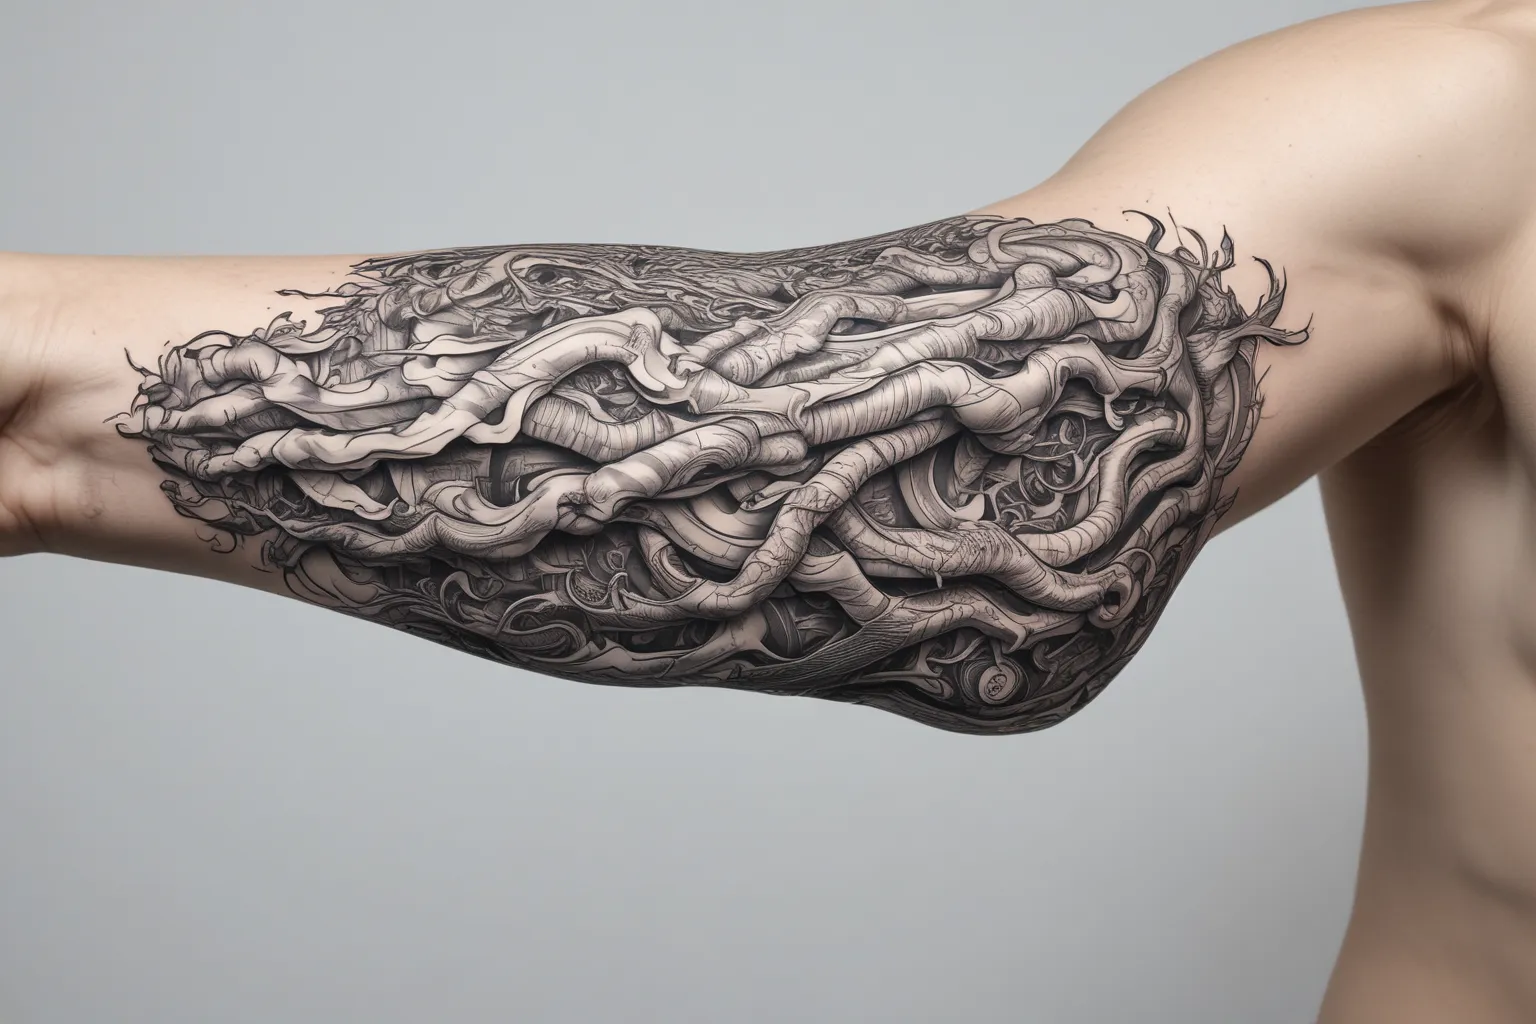 inner elbow crook of the arm ,a vein tattoo of the basilic mcephalic and median cubicle veins in 3d effect टैटू